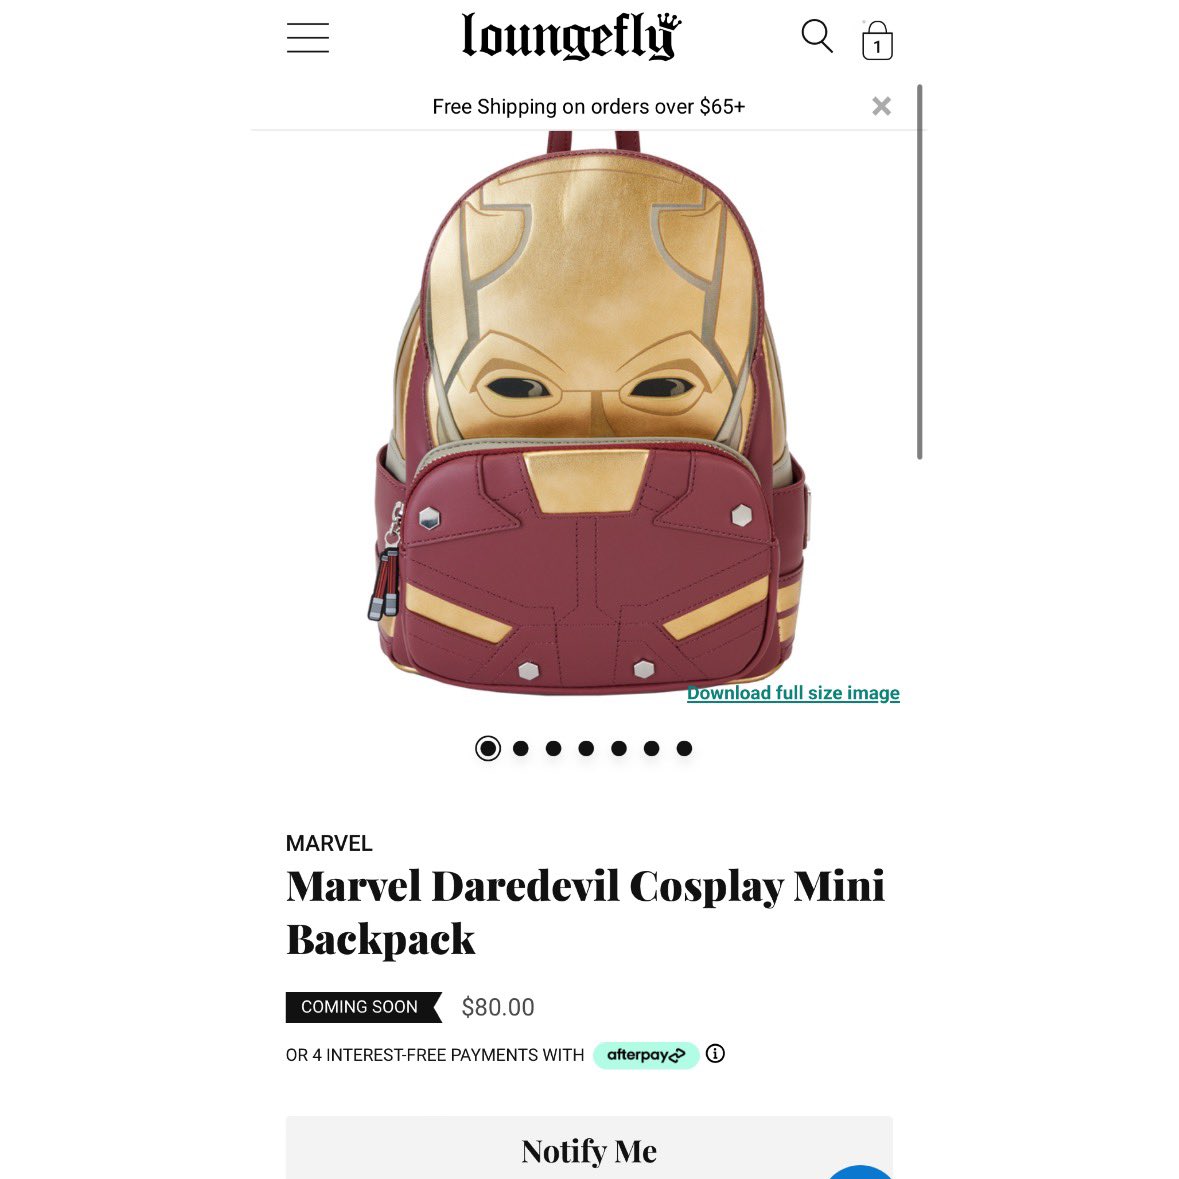 Omg!!!! Marvel Daredevil Cosplay Mini Backpack I can’t wait!!!!! #Daredevil #DaredevilSheHulk #TheManWithoutFear #TheDevilOfHellsKitchen #MattMurdock @FunkoPOPsNews @funkoinfo_ @Daredevil **I am just a fan, I am not associated with any of the brands referenced in this post